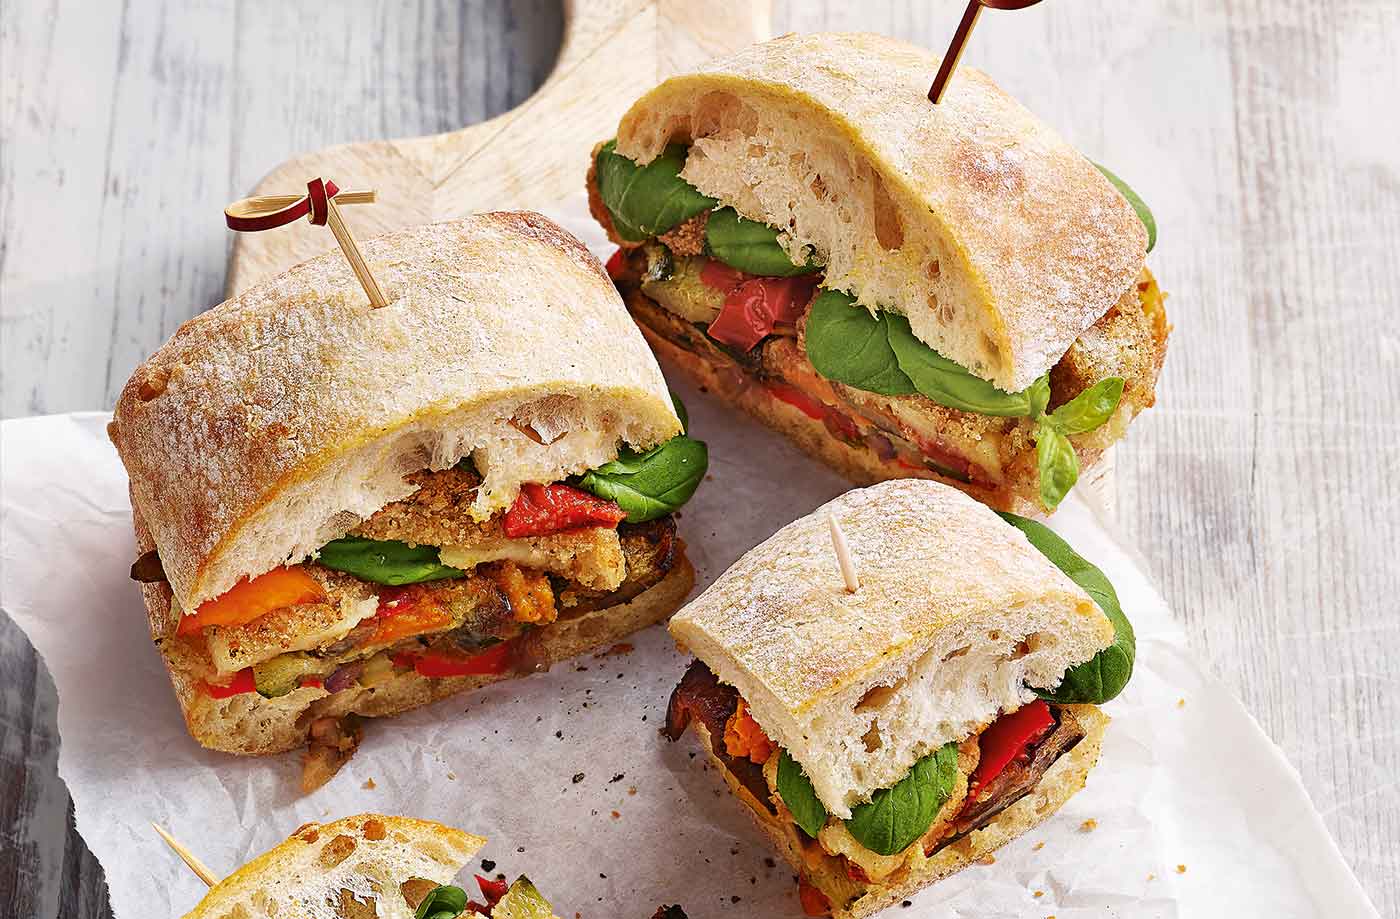 Crisp on the outside, with a smoky, gooey filling of mozzarella sticks and colourful chargrilled veg